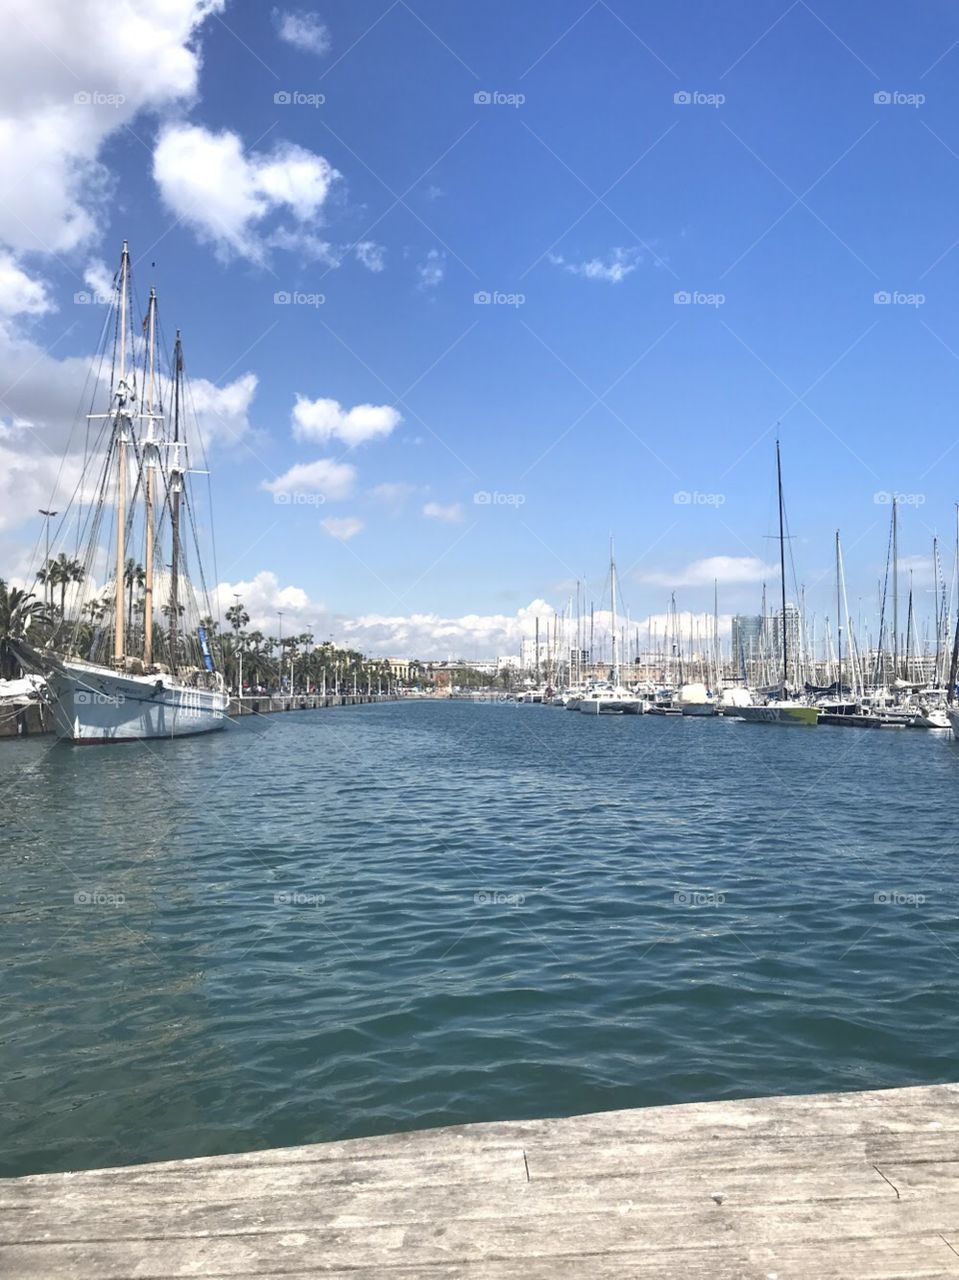 Boat dock in Spain on water with blue sky 